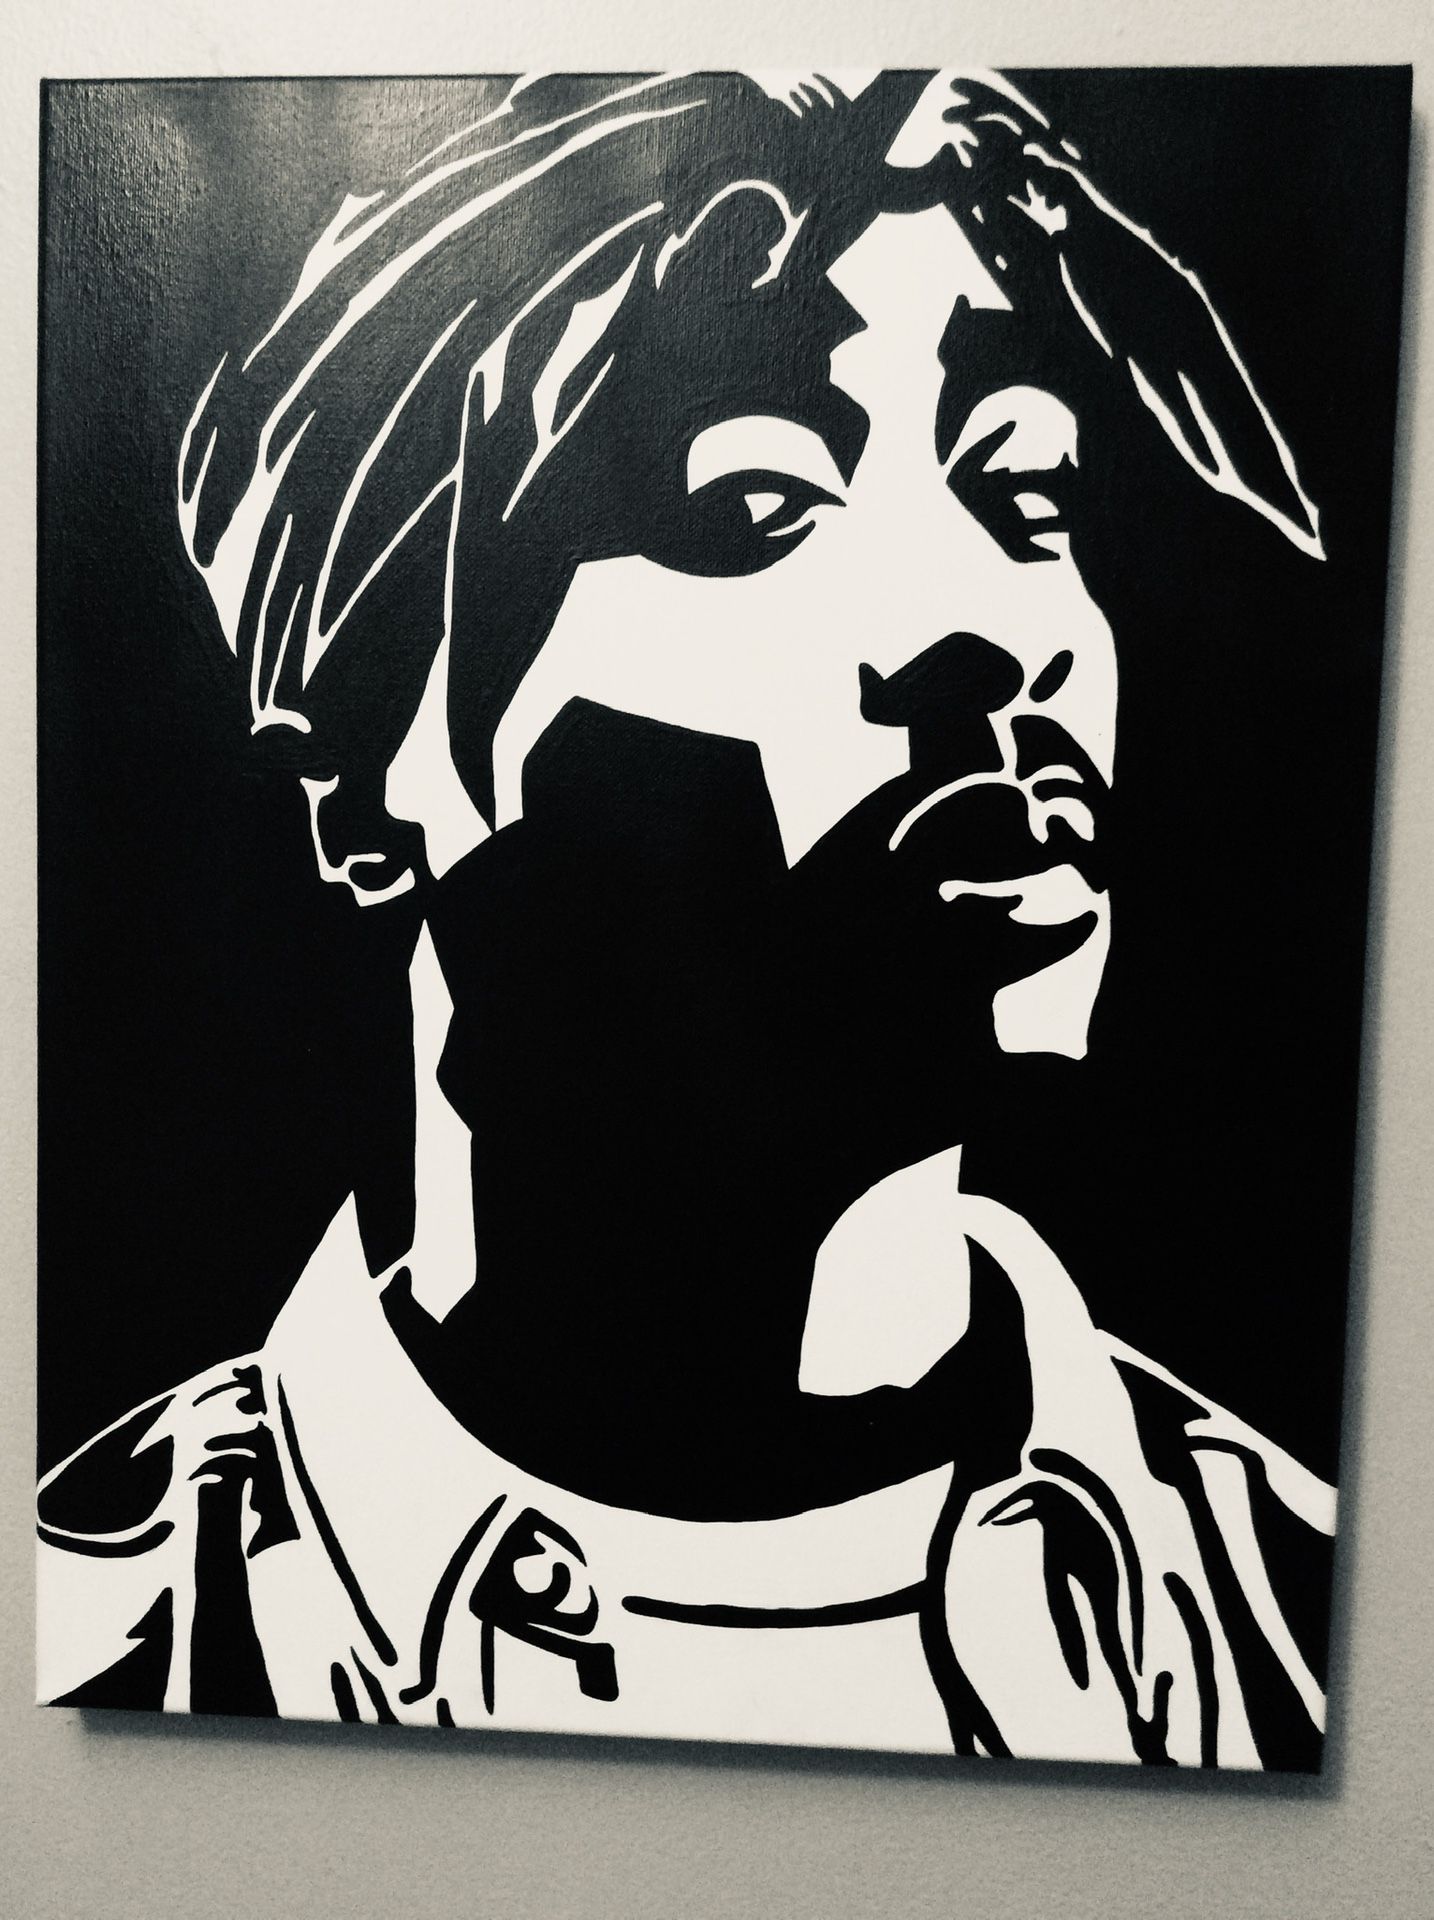 Tupac 16x20 inches Hand Painted canvas